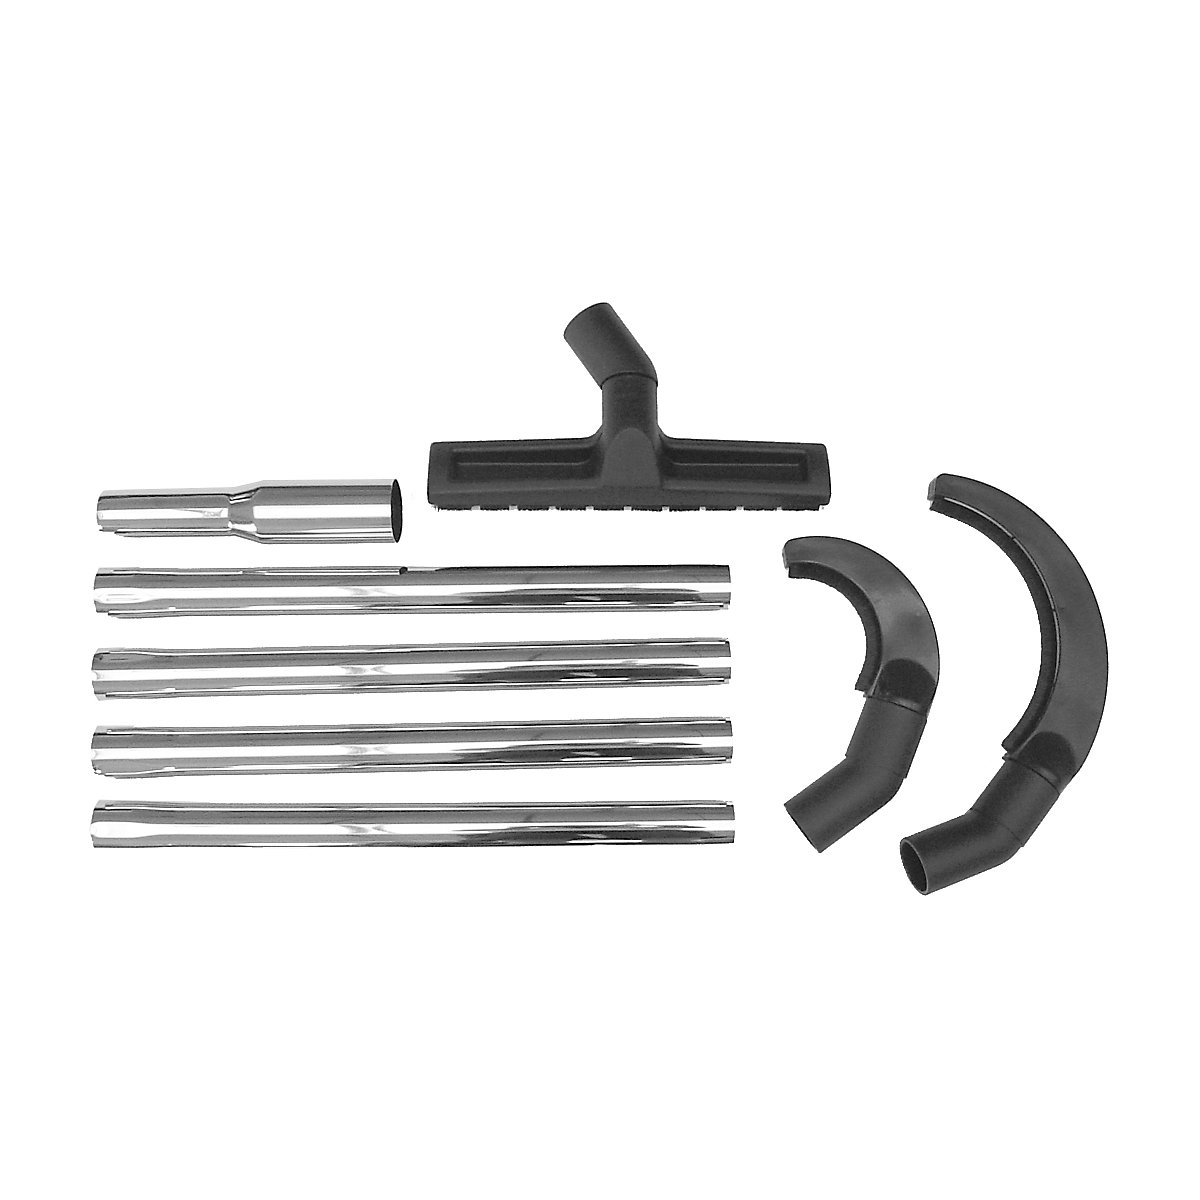 Long reach cleaning set